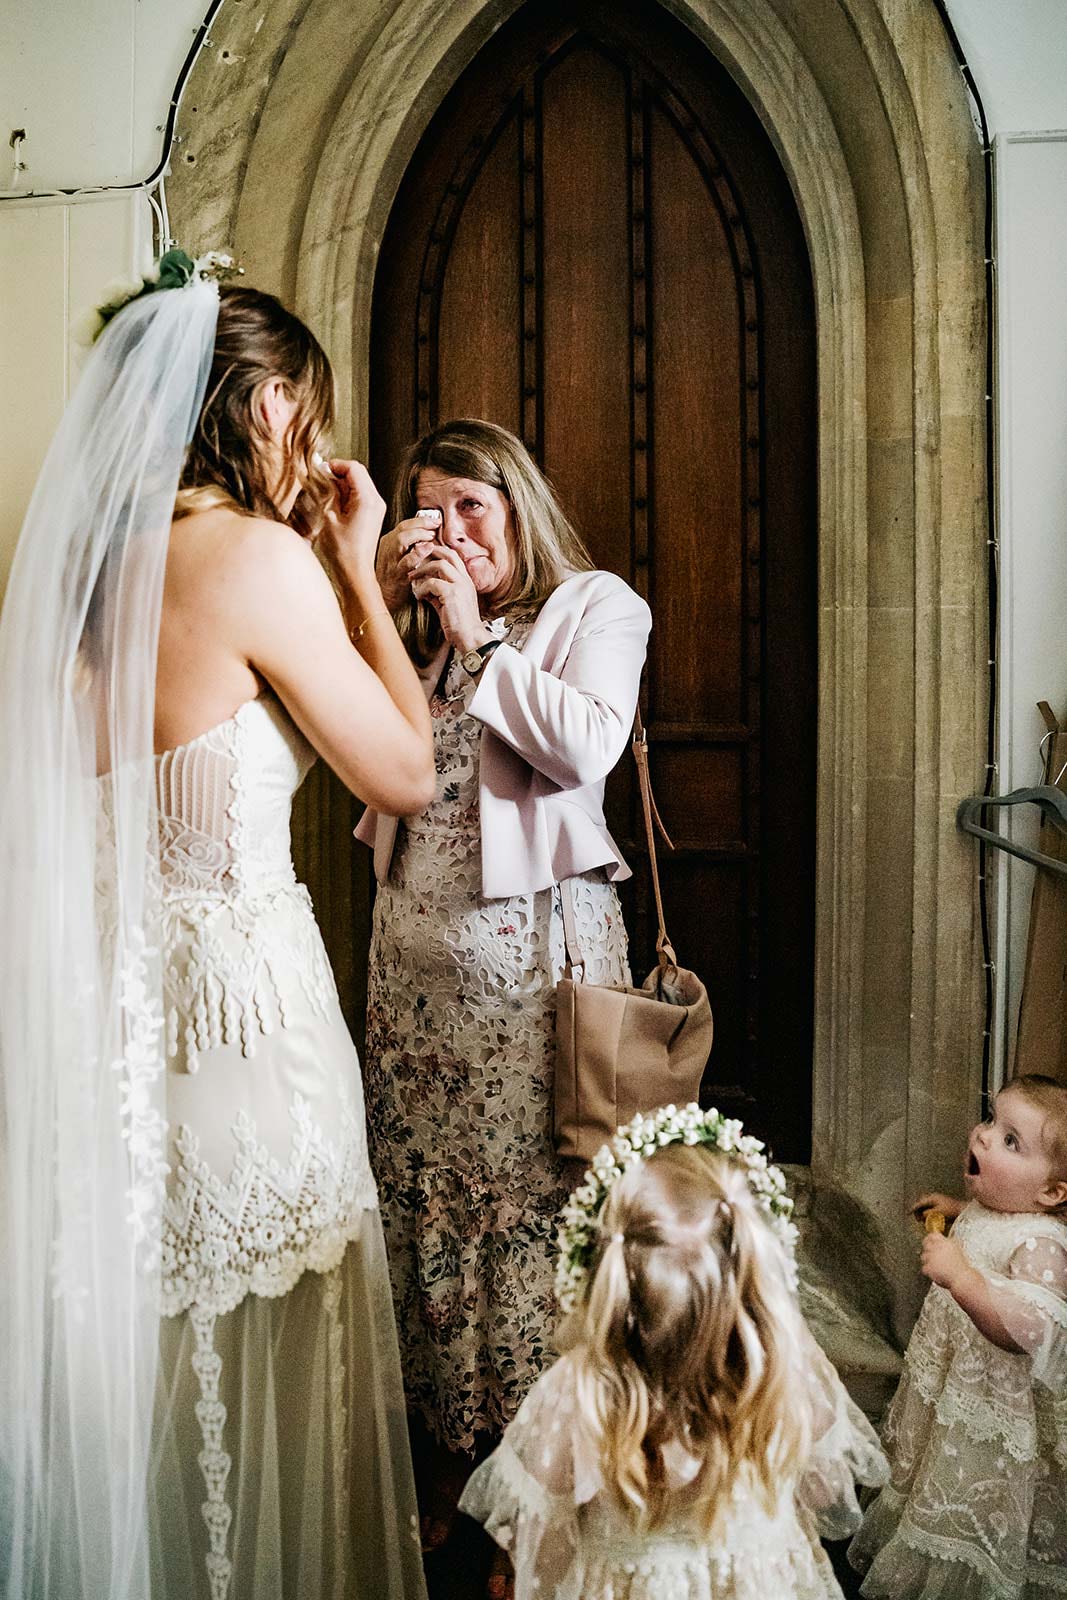 Mother of bride wiping tears before wedding